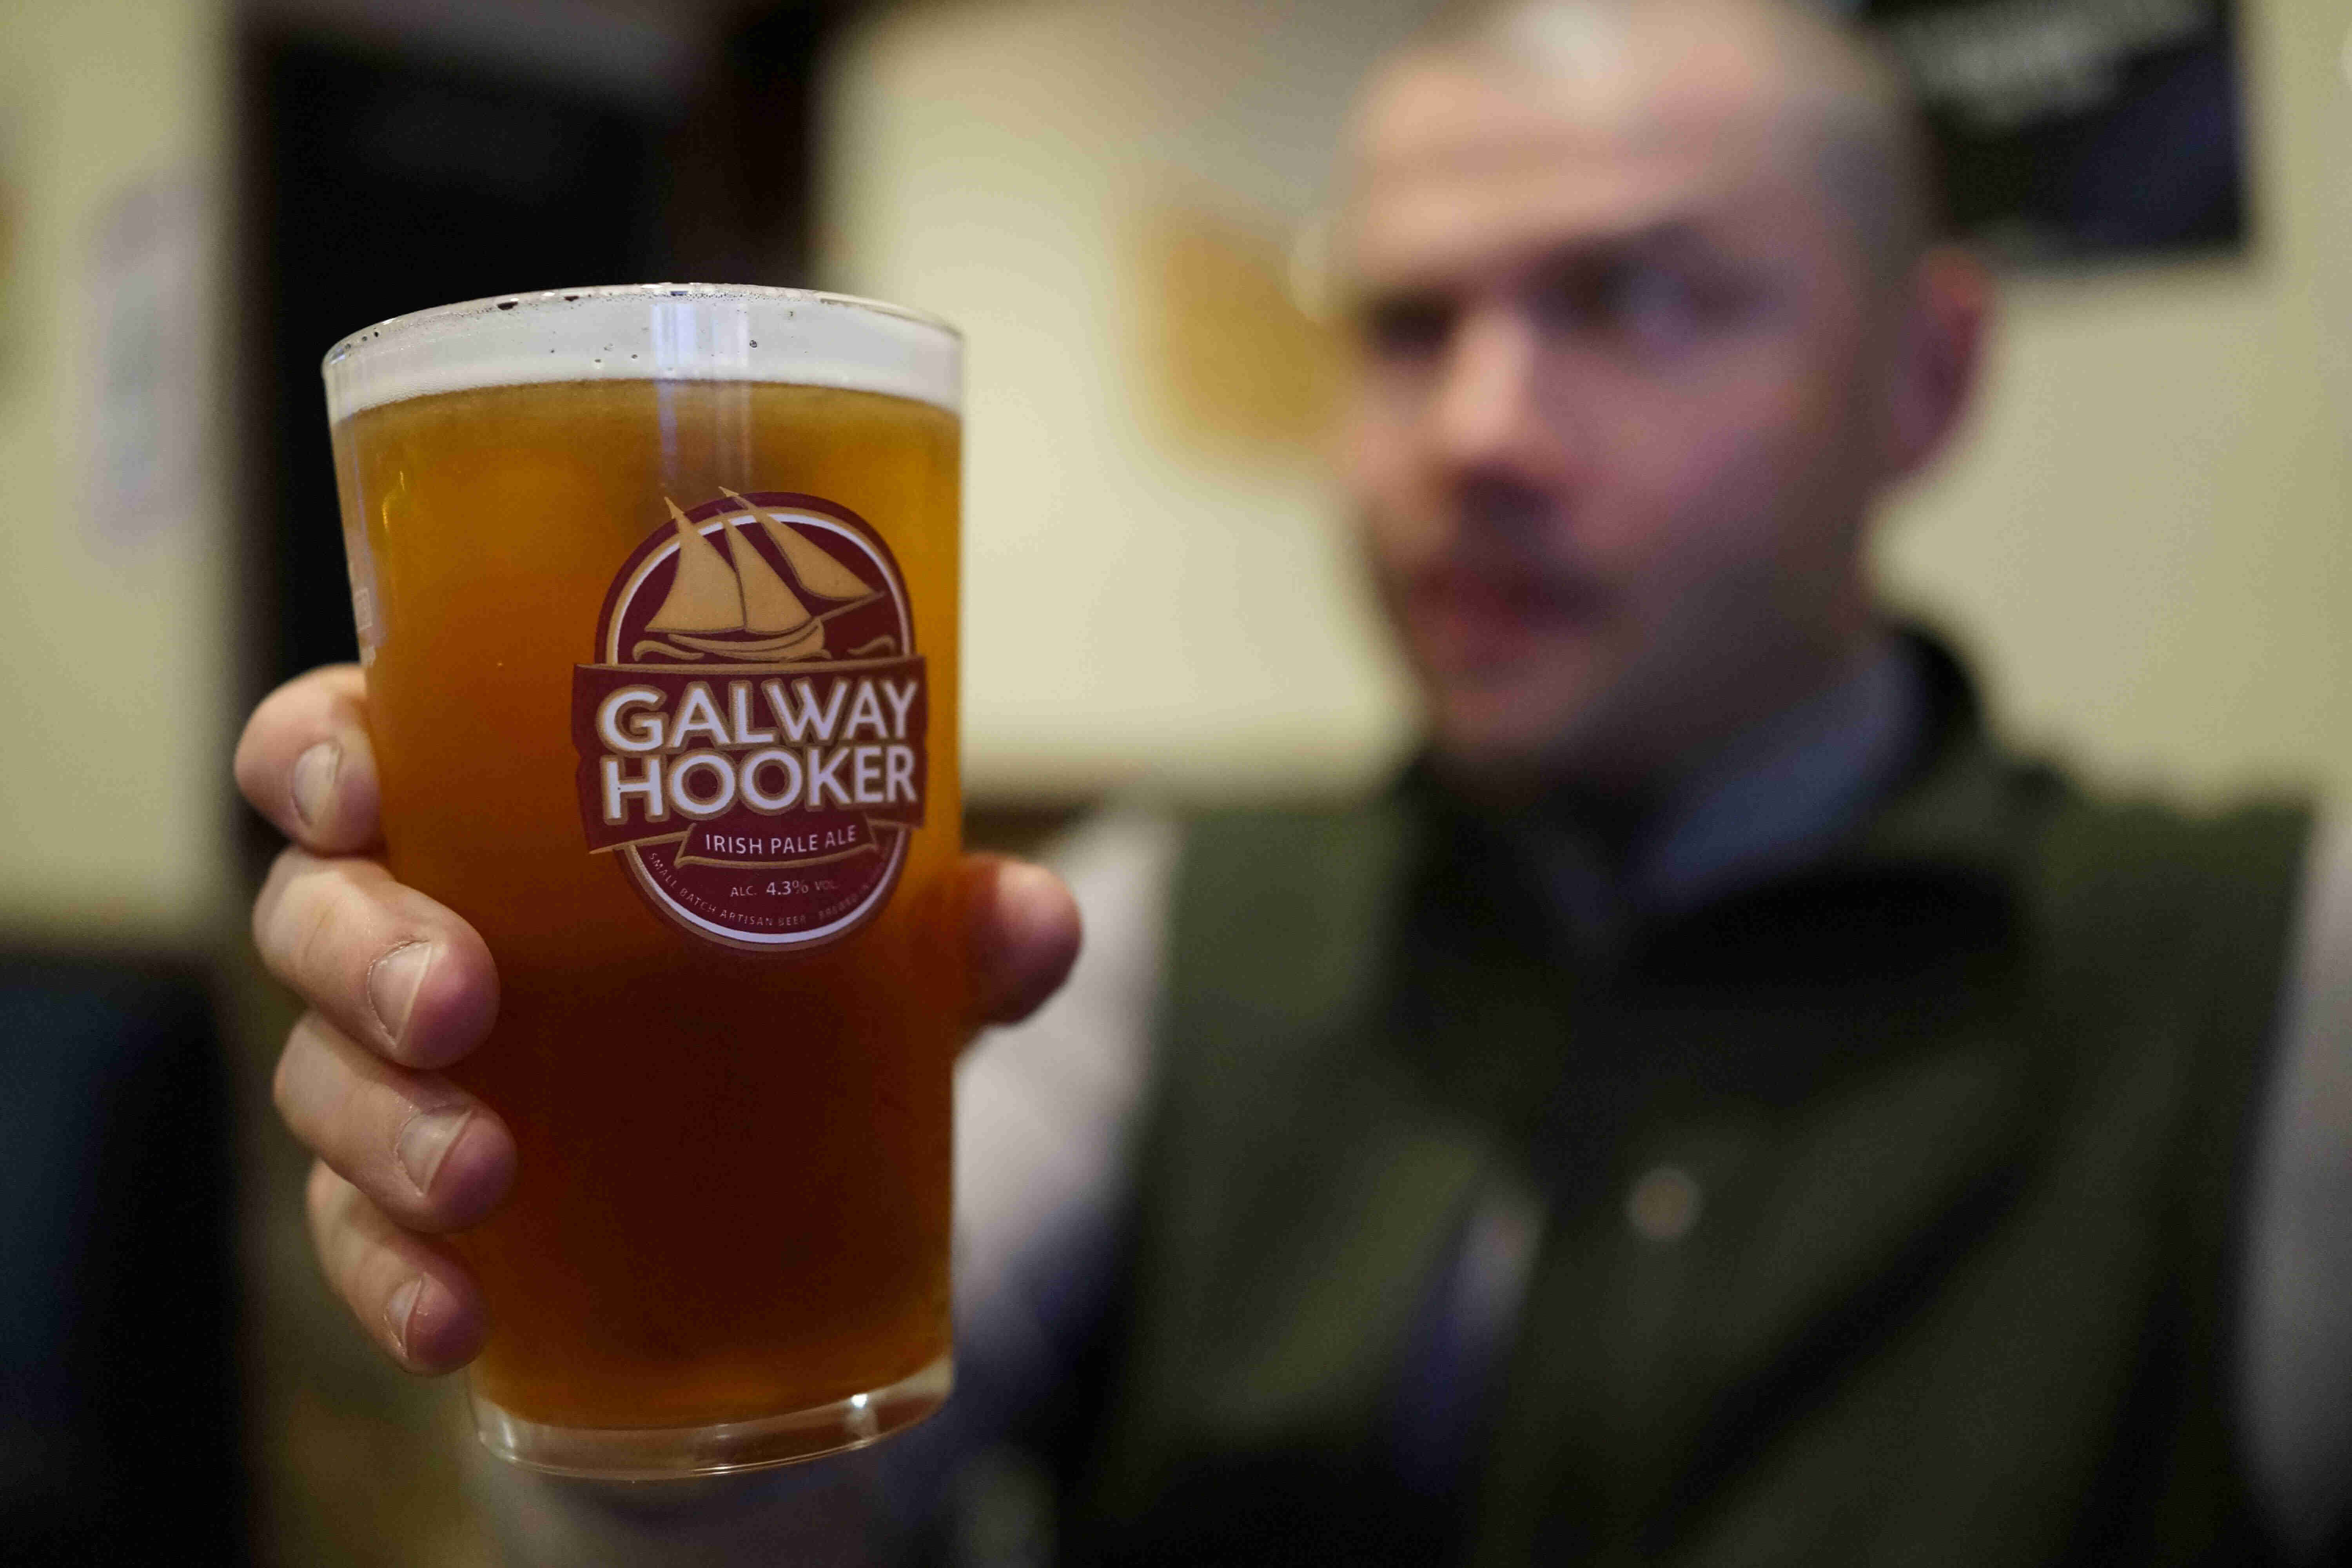 Close up of a glass of beer with a Galway Hooker logo on it, with a blurred person holding it up from behind